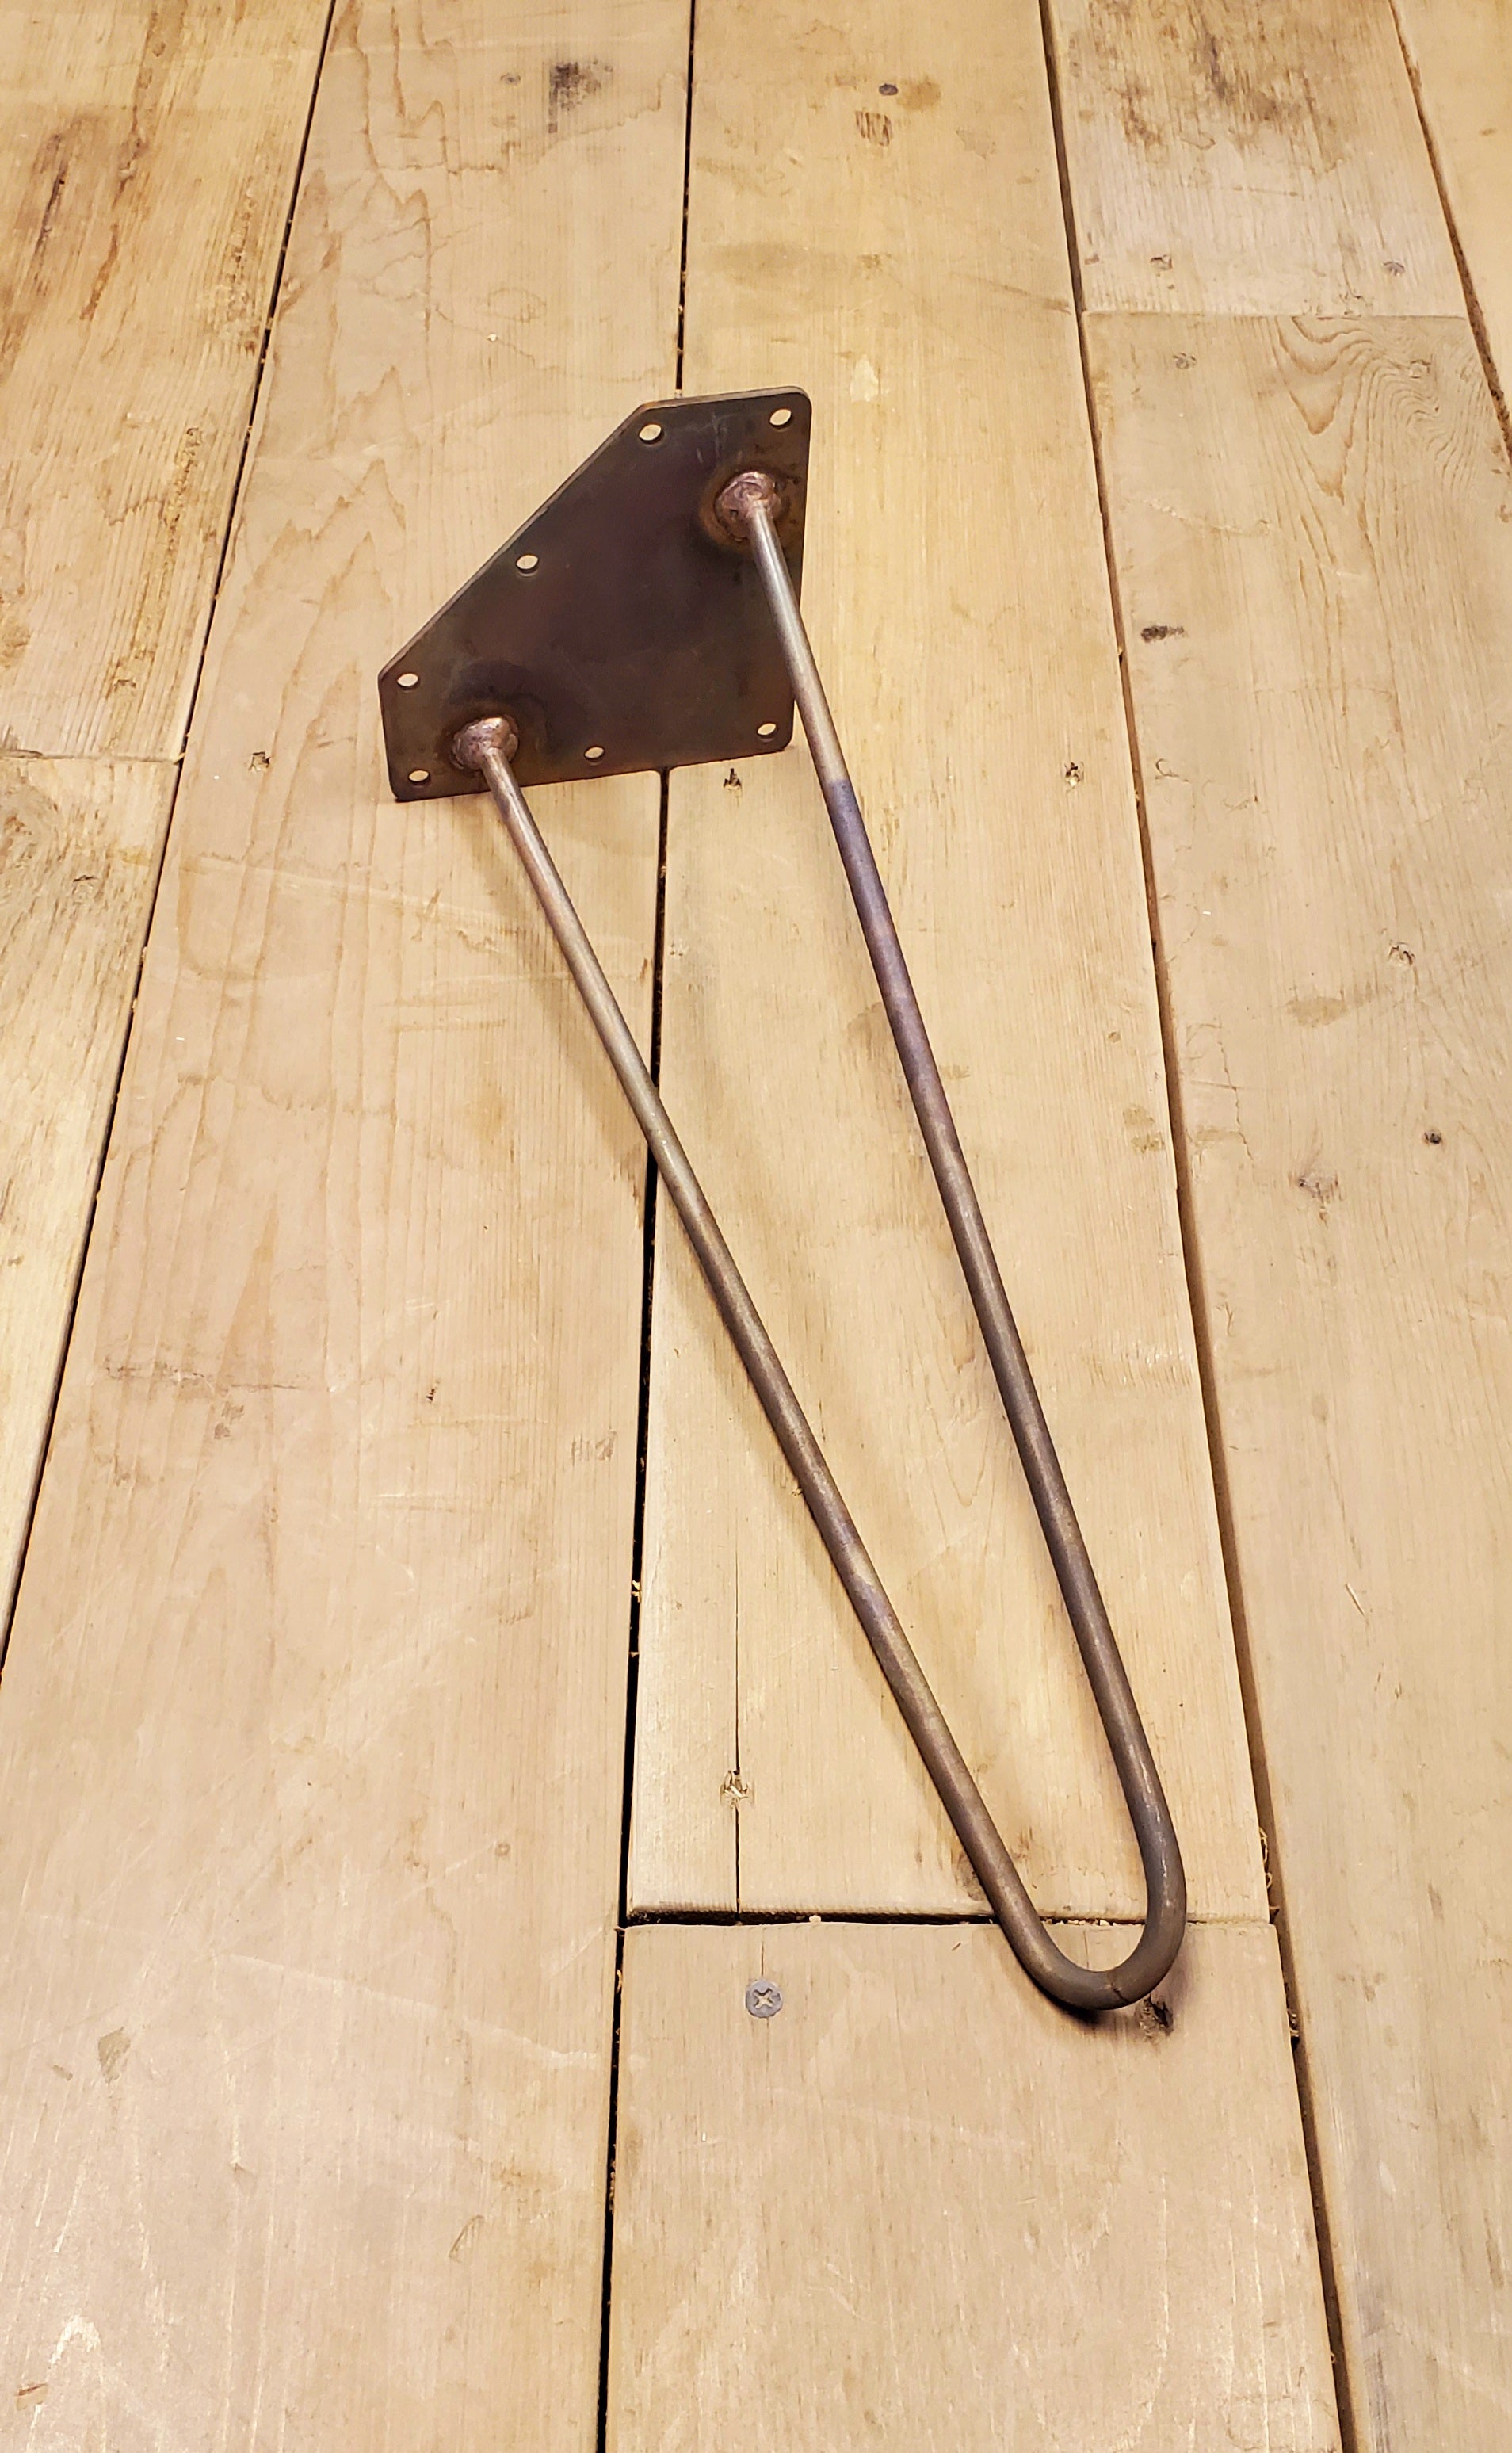 Hairpin Leg 14" Antique Copper 2 prong - Spearhead Collection - Hairpin Legs - Copper, hairpin legs